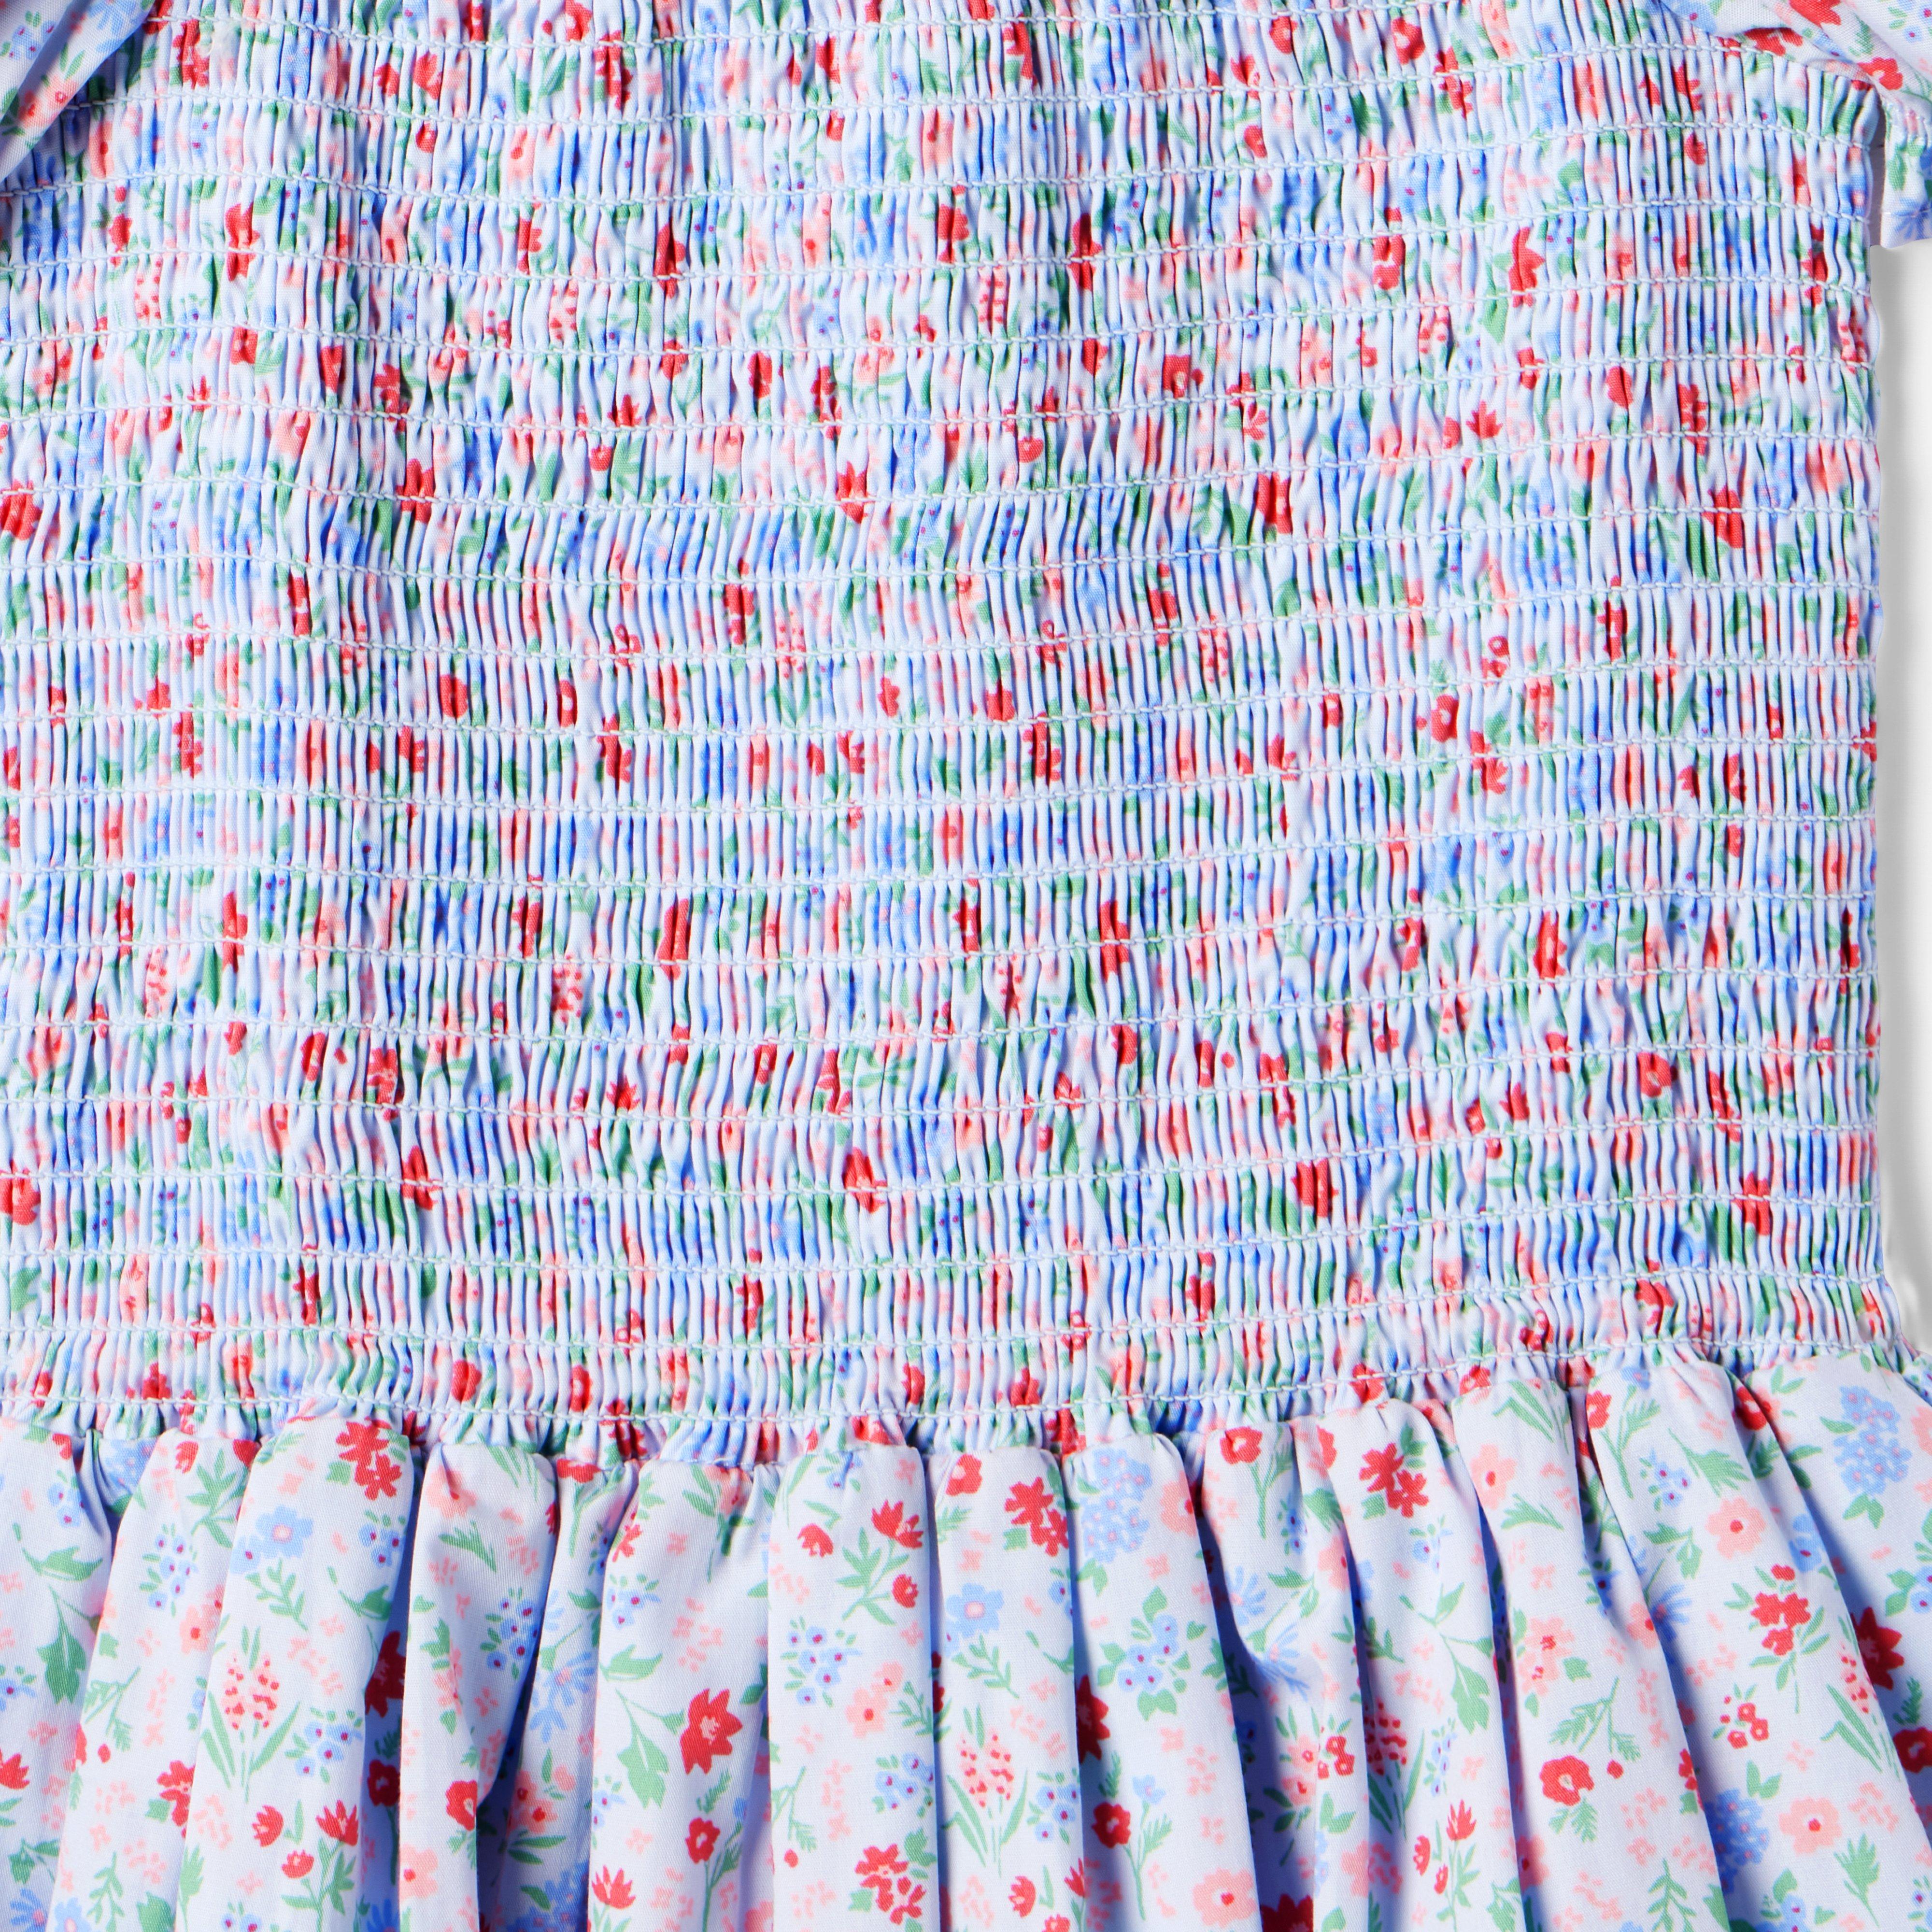 The Grace Smocked Puff Sleeve Dress